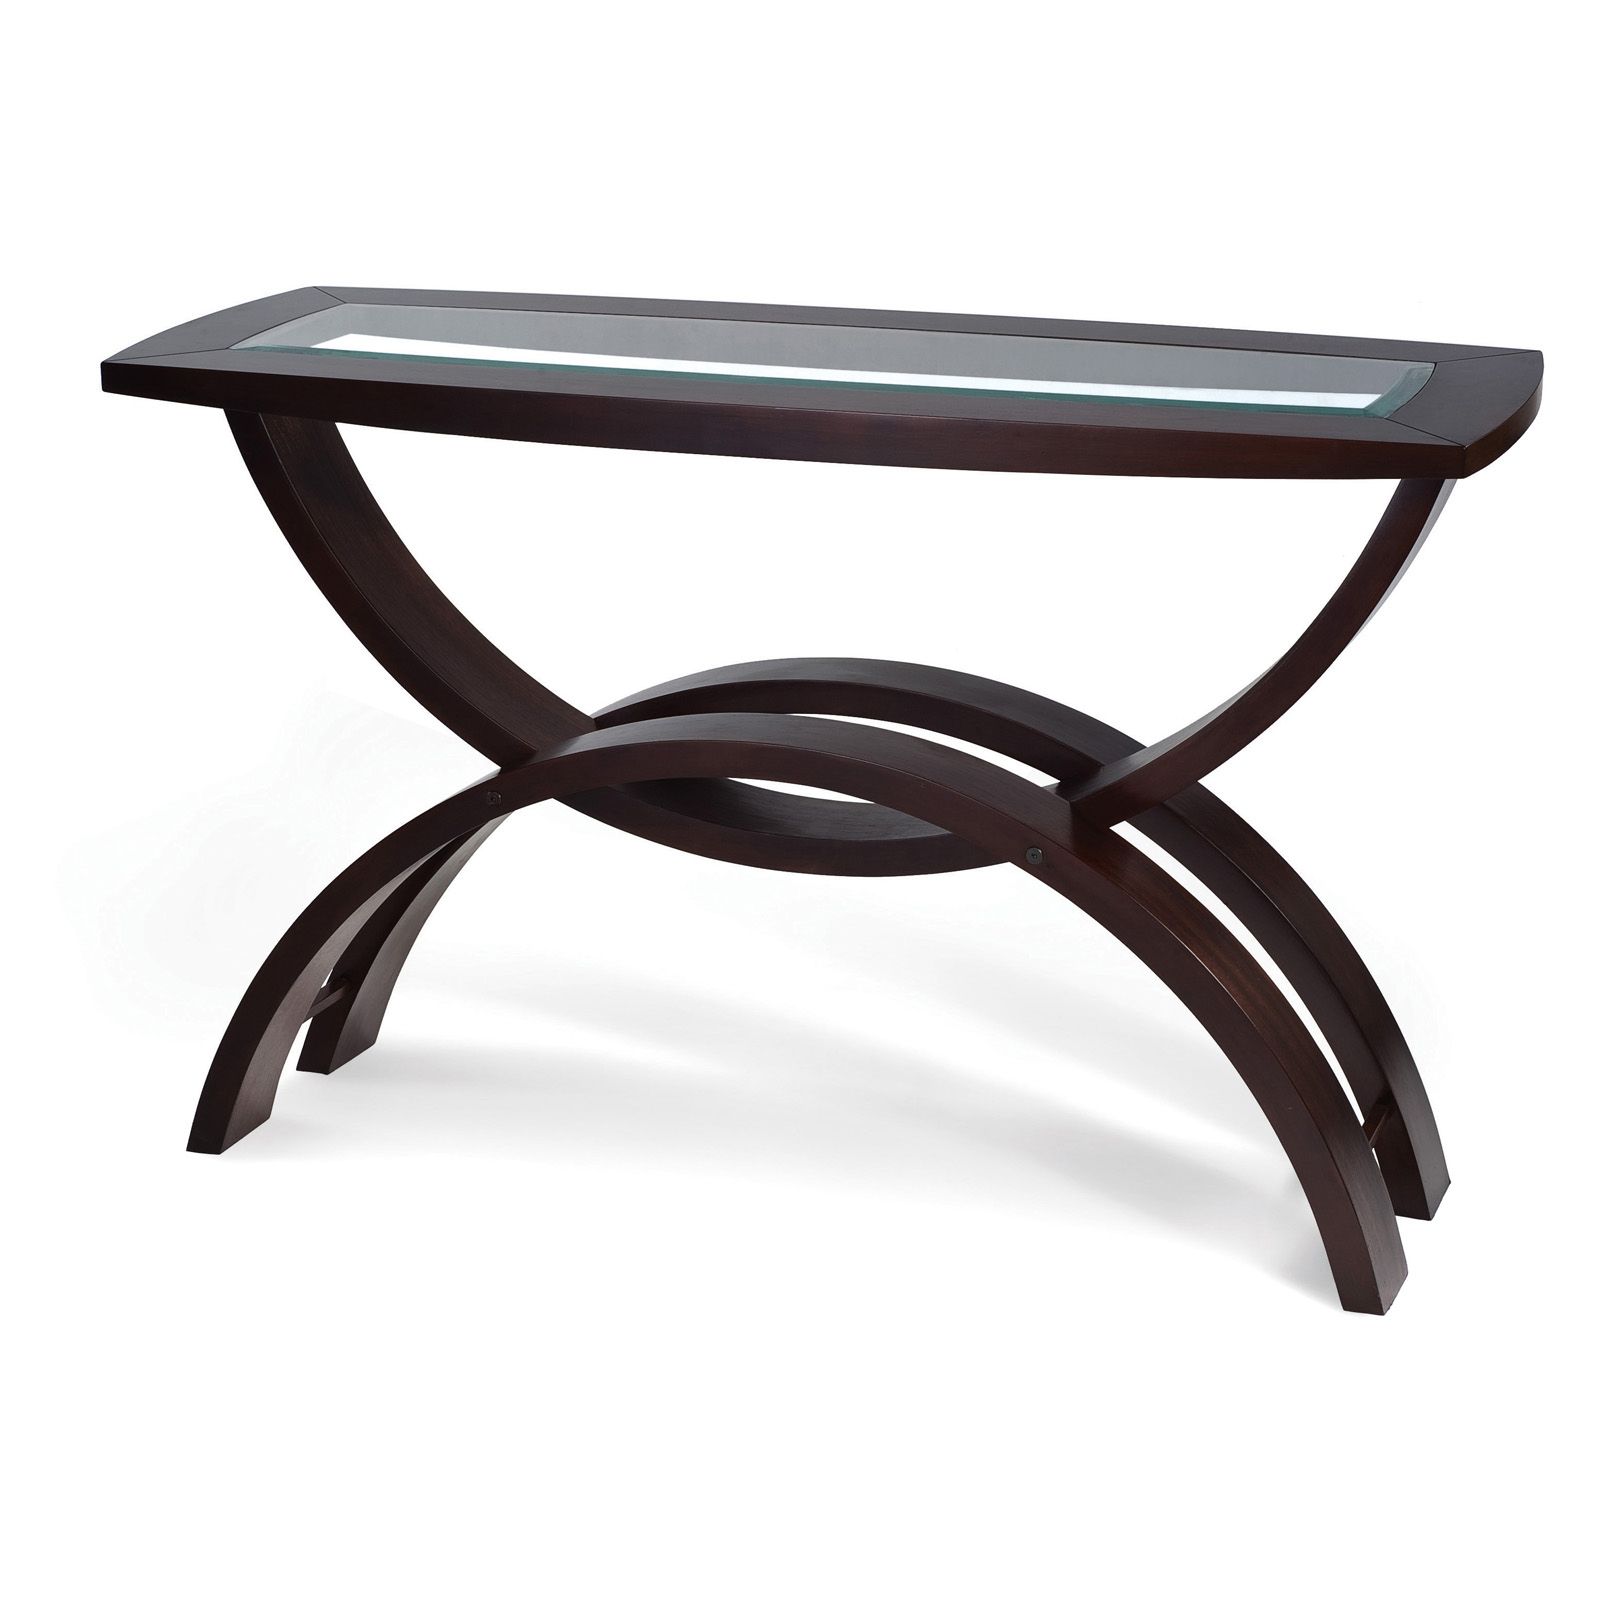 Magnussen T1351 Helix Wood Rectangular Console Table At Hayneedle For Wood Rectangular Console Tables (View 6 of 20)